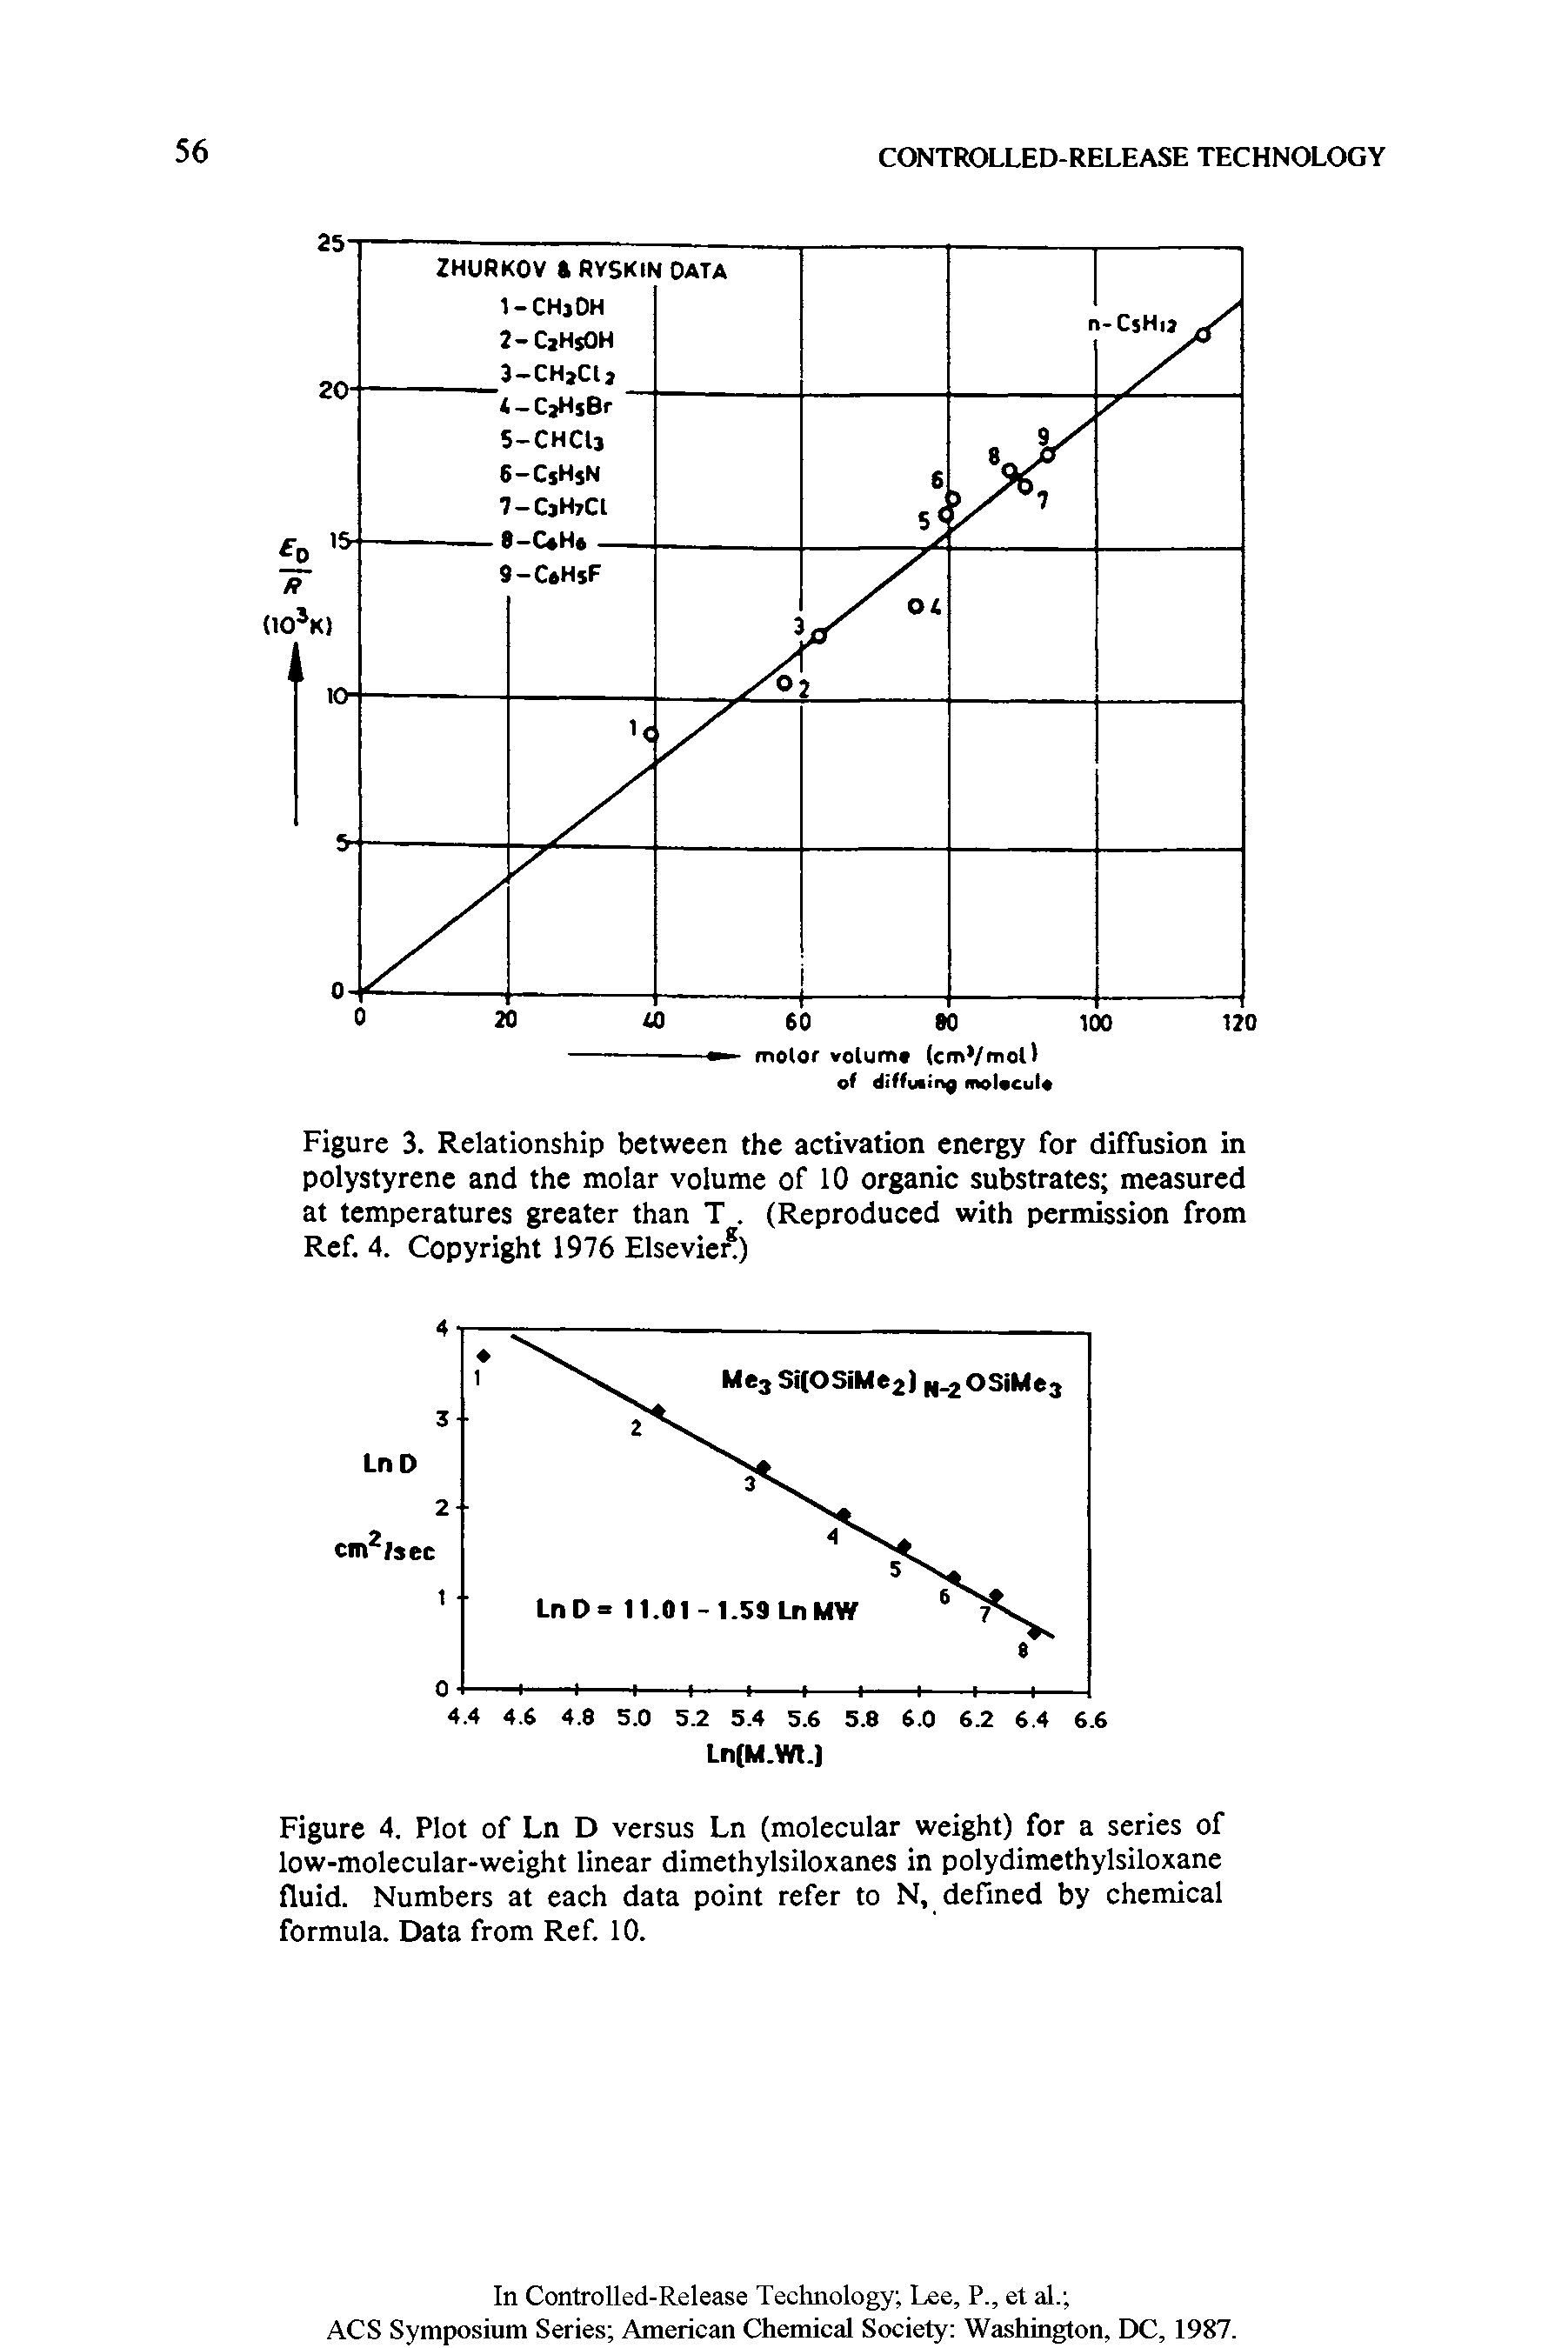 Figure 3. Relationship between the activation energy for diffusion in polystyrene and the molar volume of 10 organic substrates measured at temperatures greater than T. (Reproduced with permission from Ref. 4. Copyright 1976 Elsevier )...